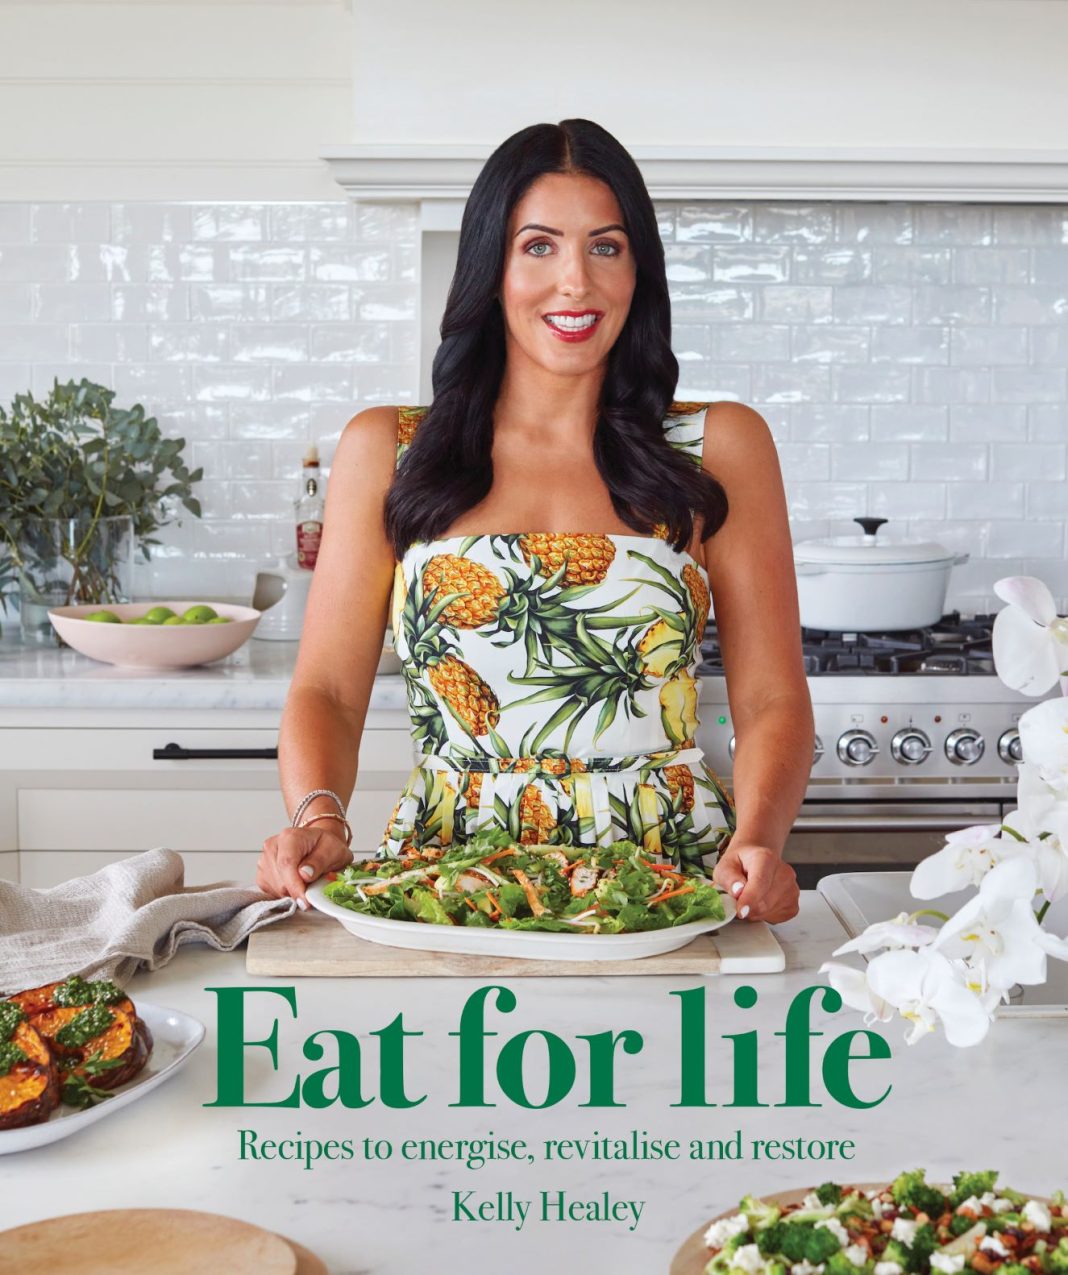 healthy smiling woman is seen on the cover of her 'Eat for Life' recipe book